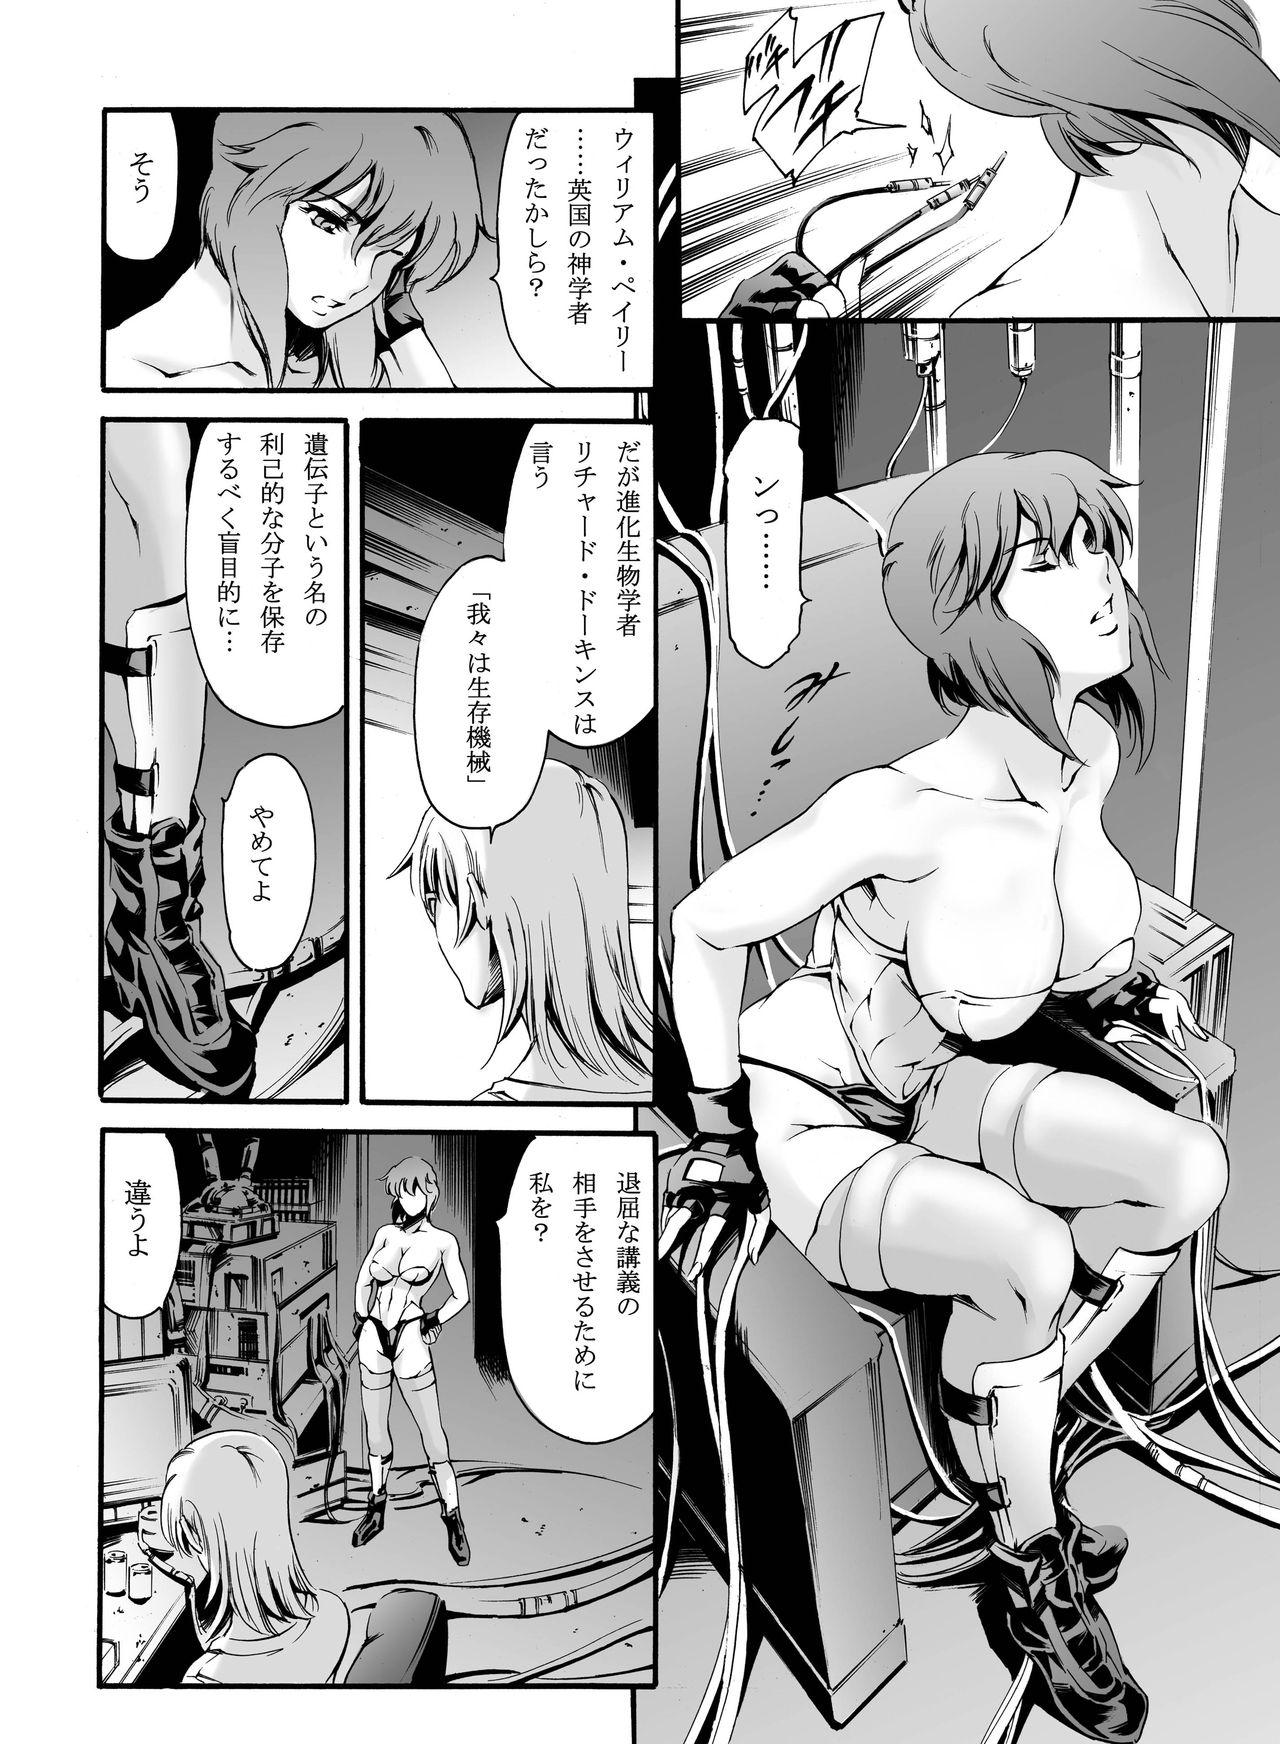 Pendeja Derenuki Vol. 1 - Ghost in the shell Squirting - Page 5